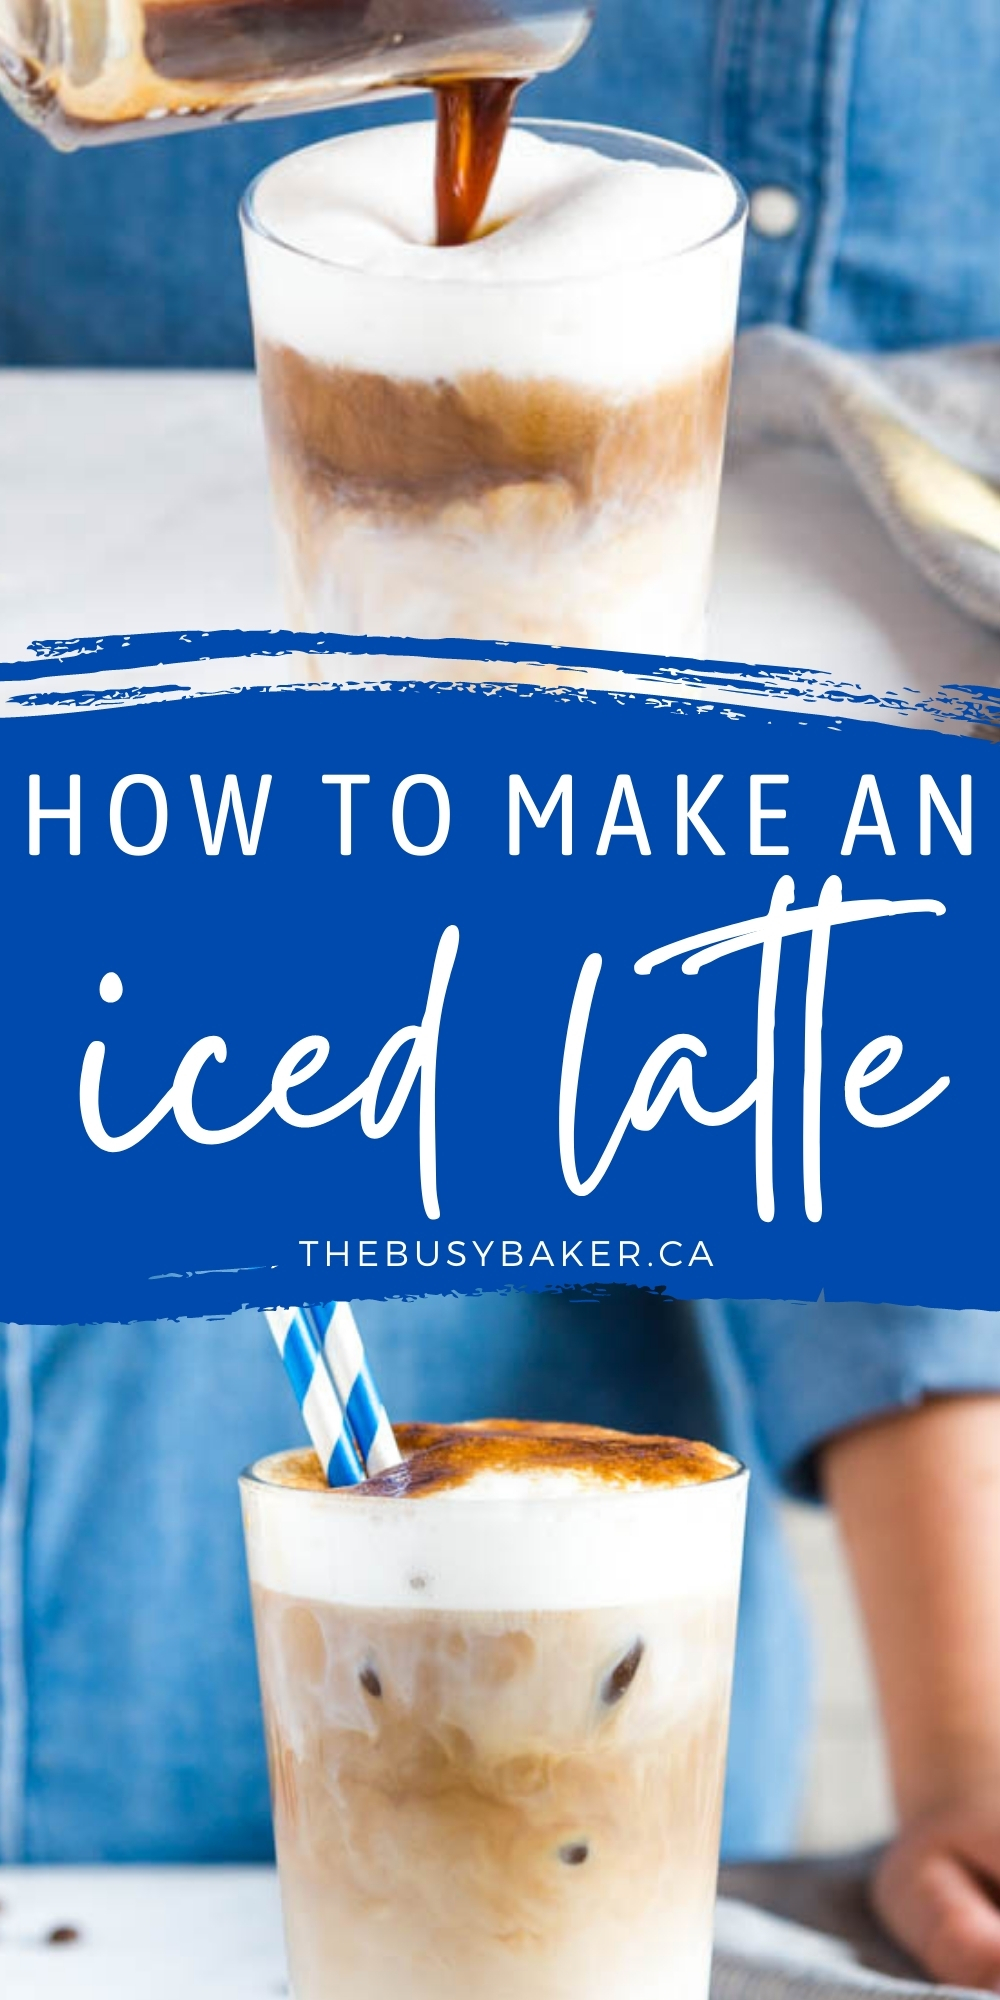 This How to Make an Iced Latte tutorial is the easiest way to make your favourite coffee shop drink at home with simple ingredients! How to make an iced latte with dairy-free, sugar-free options, and more! Recipe from thebusybaker.ca! #icedlatte #howtomakeanicedlatte #starbucks #coffee #tutorial via @busybakerblog